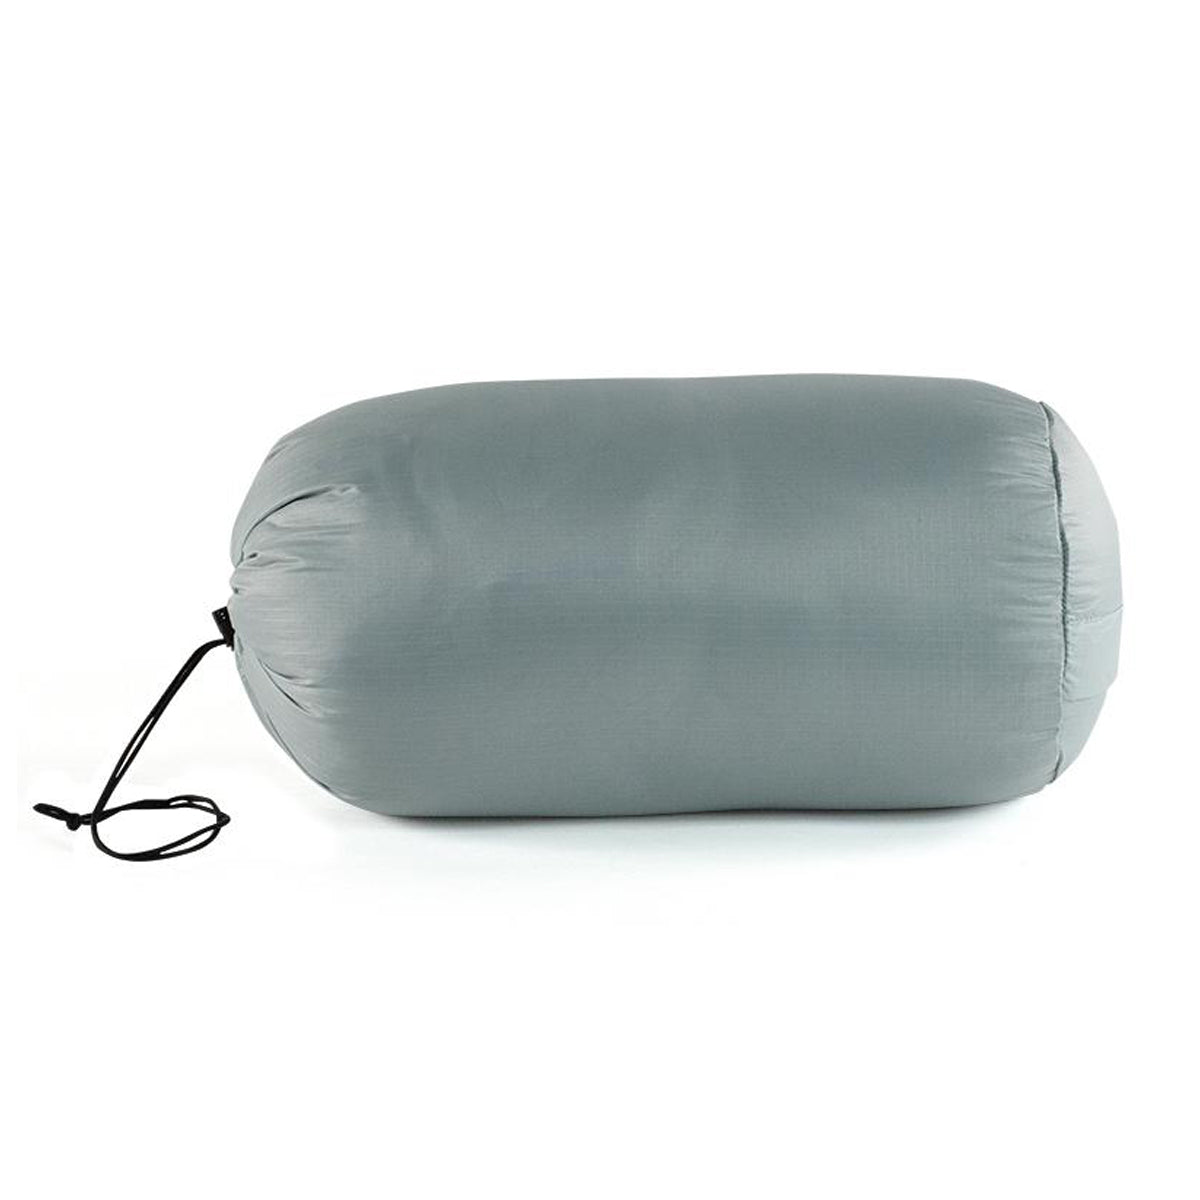 Stone Glacier Chilkoot 0º Sleeping Bag by Stone Glacier | Camping - goHUNT Shop